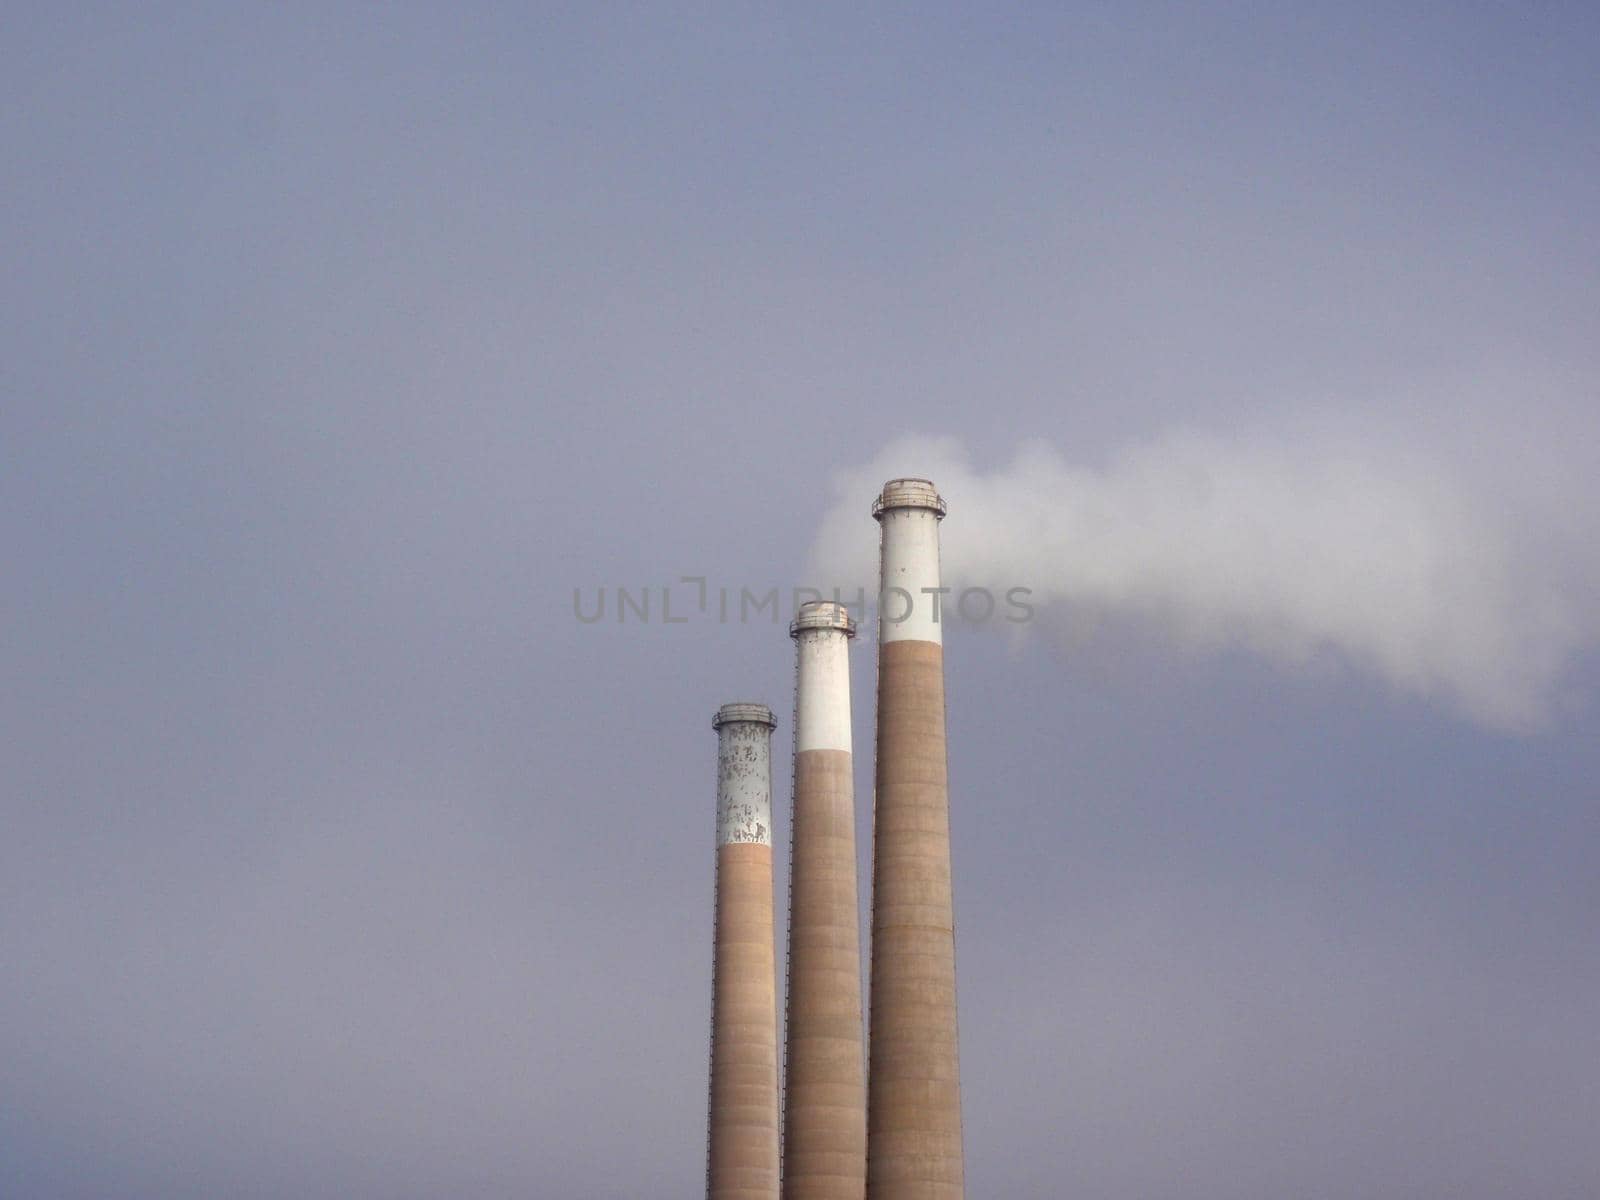 Three Smokestacks of the same size put pollution into the air in California.